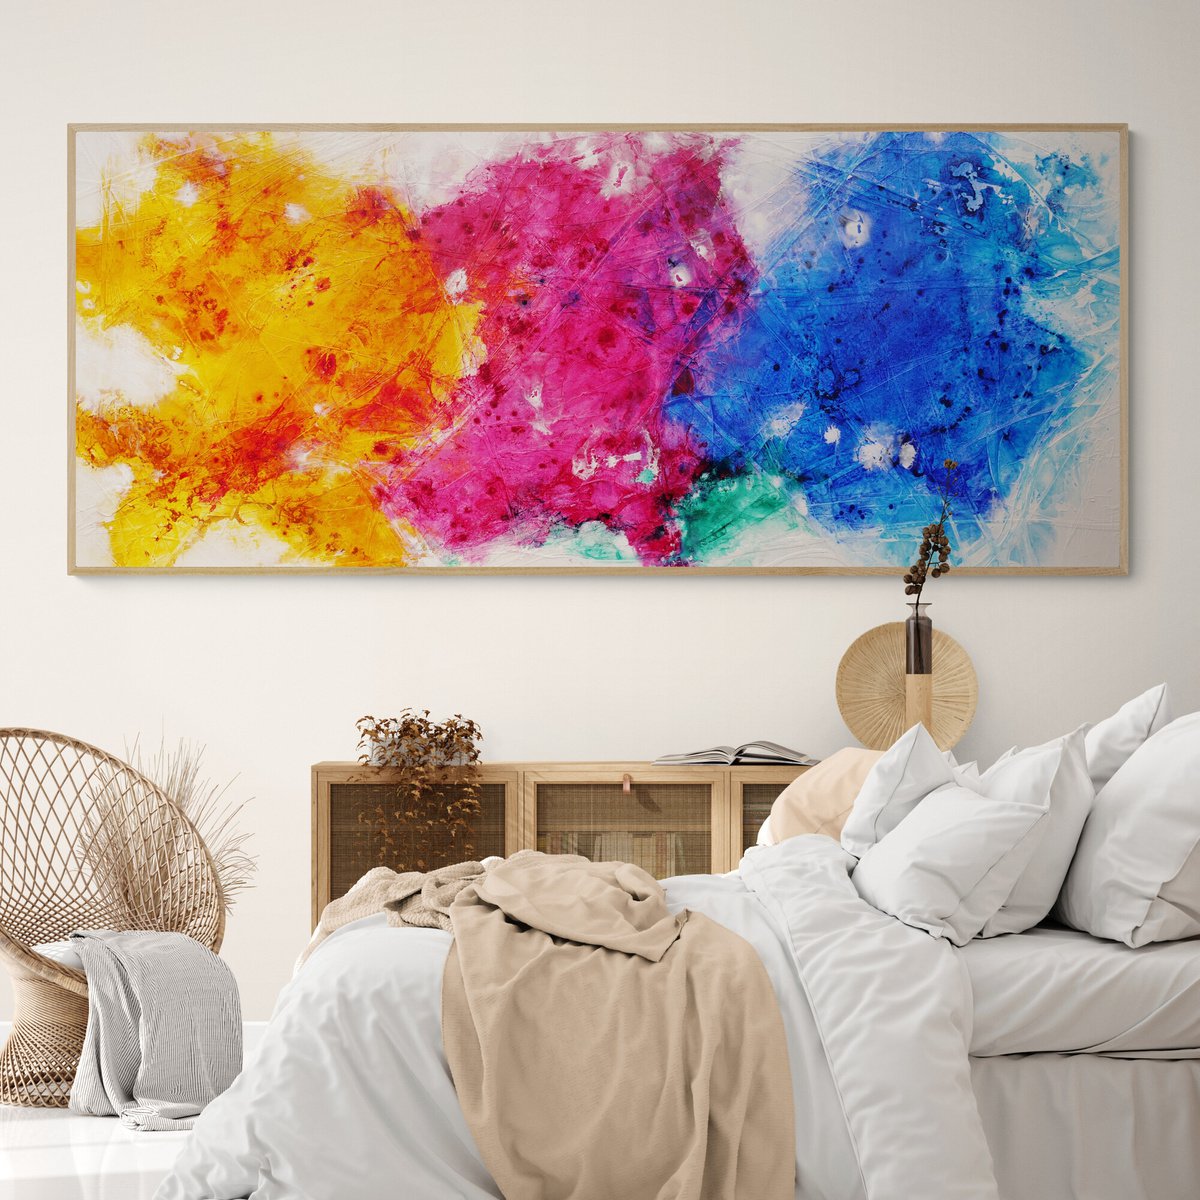 Candy Colour 270cm x 120cm Colourful Textured Abstract Art by Franko